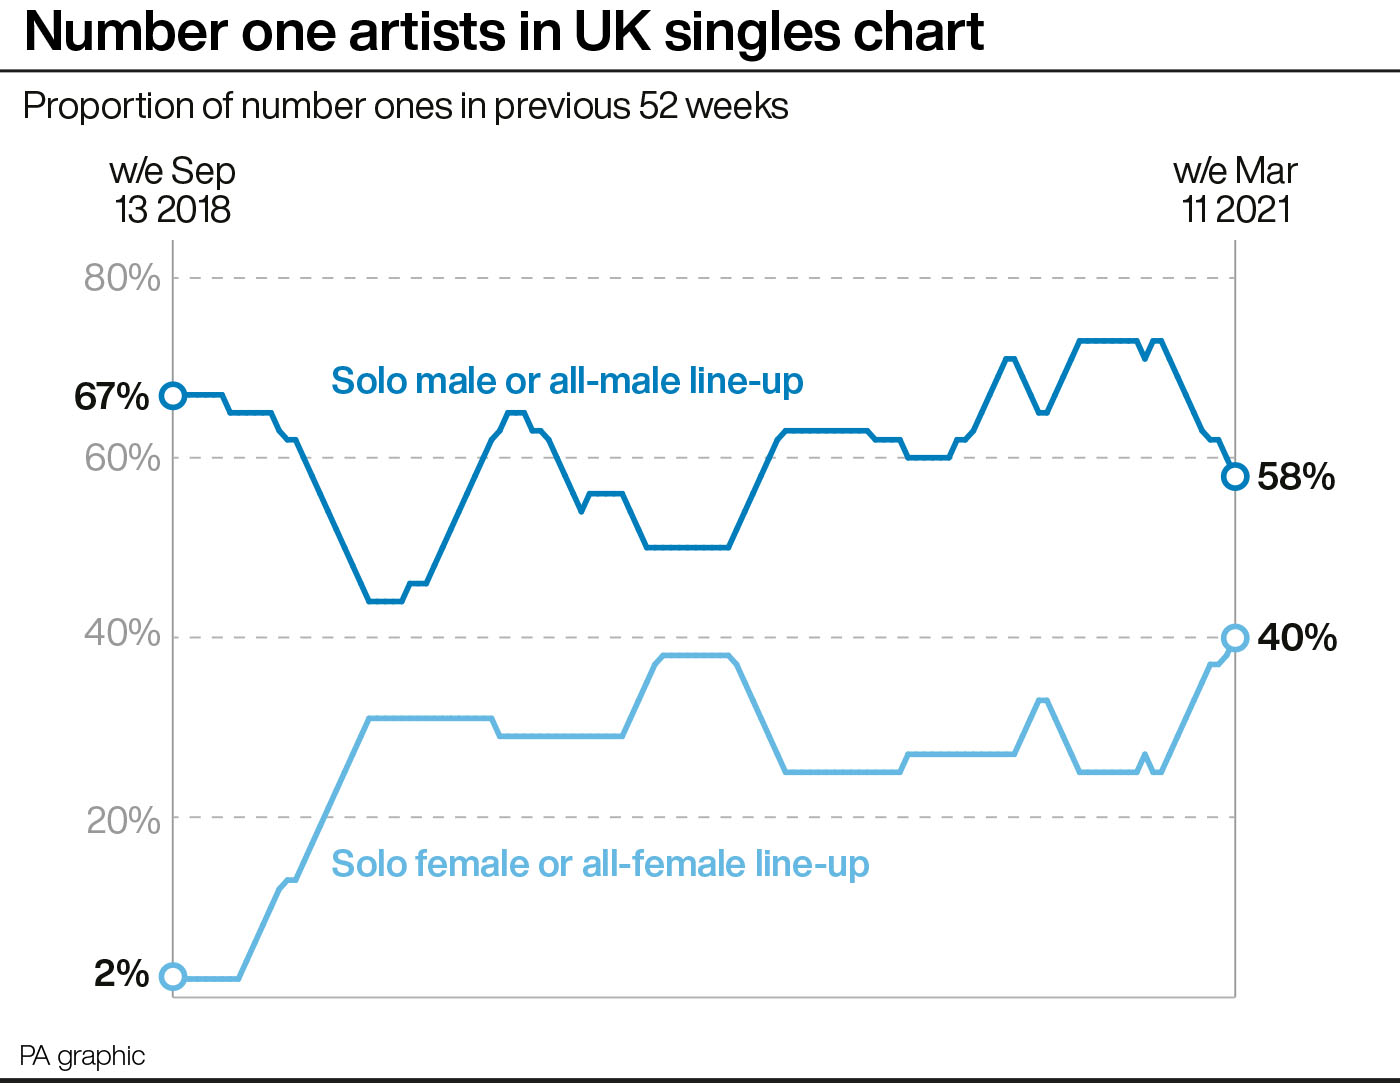 Number one artists in UK singles chart by gender